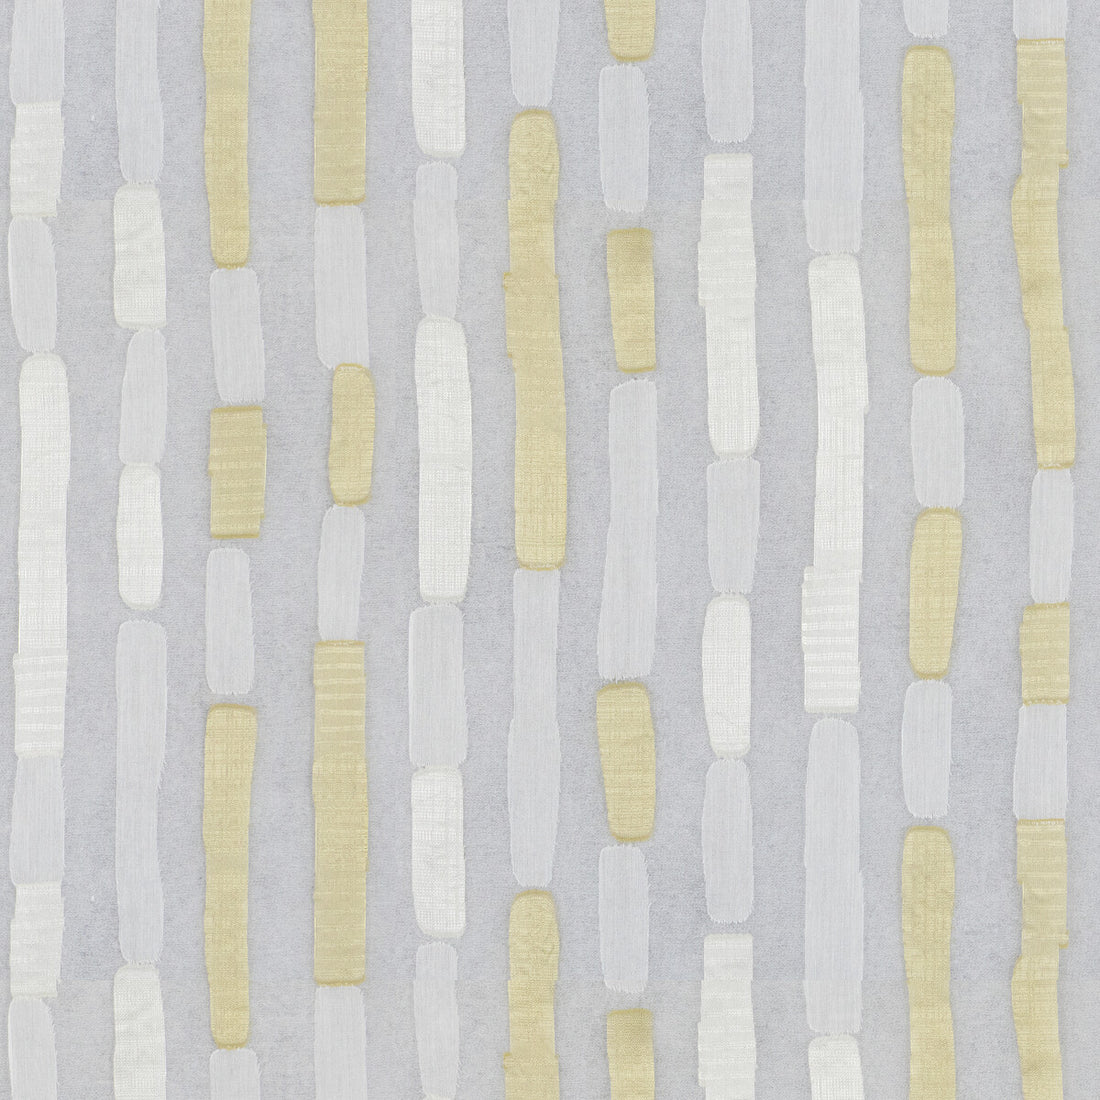 Kravet Contract fabric in 4527-14 color - pattern 4527.14.0 - by Kravet Contract